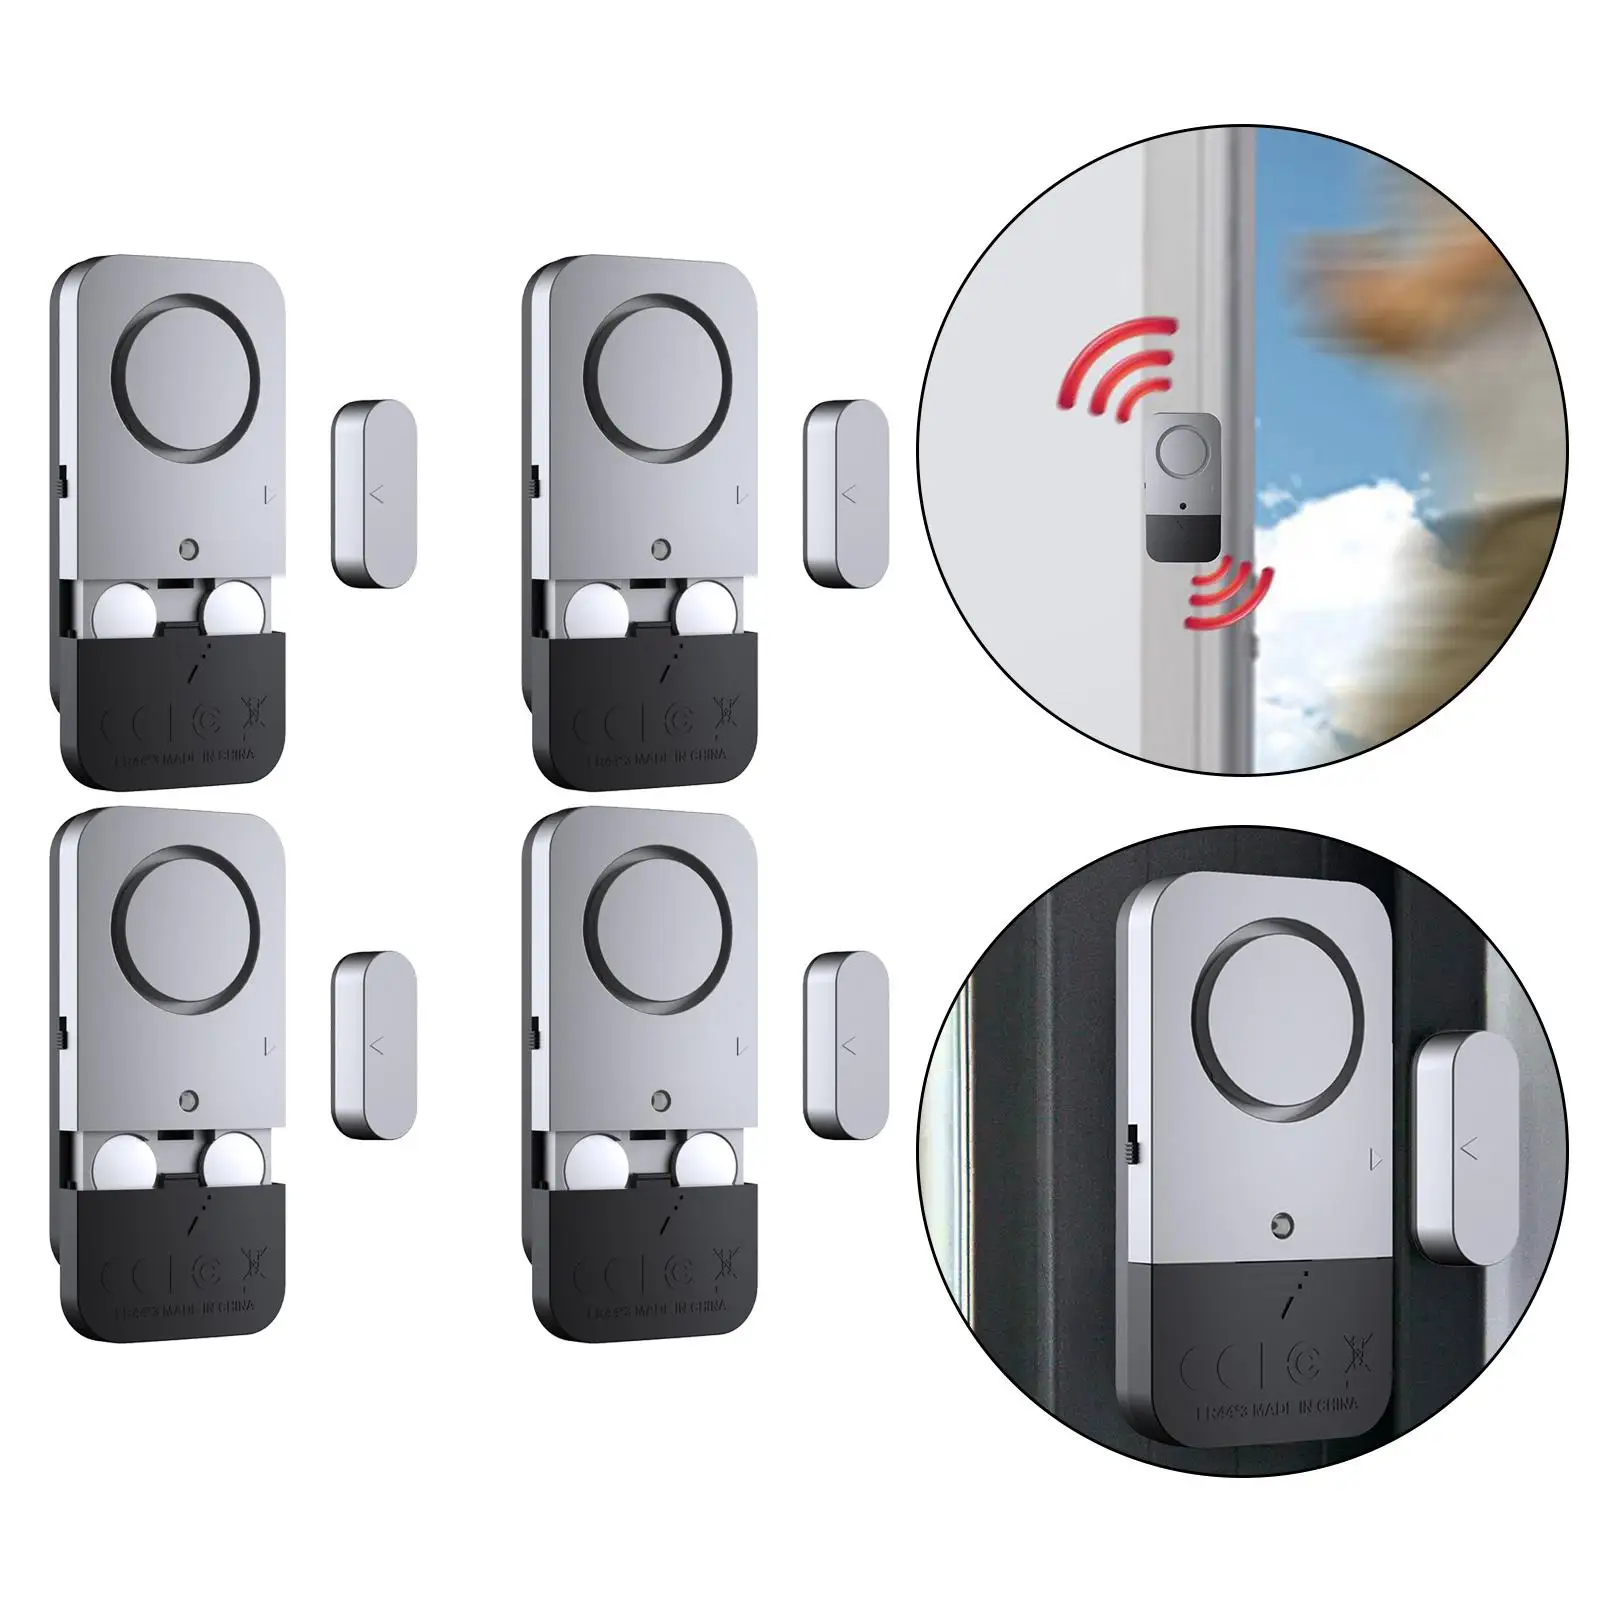 4Pcs Door Window Alarm 120dB Loud Easy to Install Magnetic Sensor Home Security Alarm for Office Home Business Dorm Kids Safety